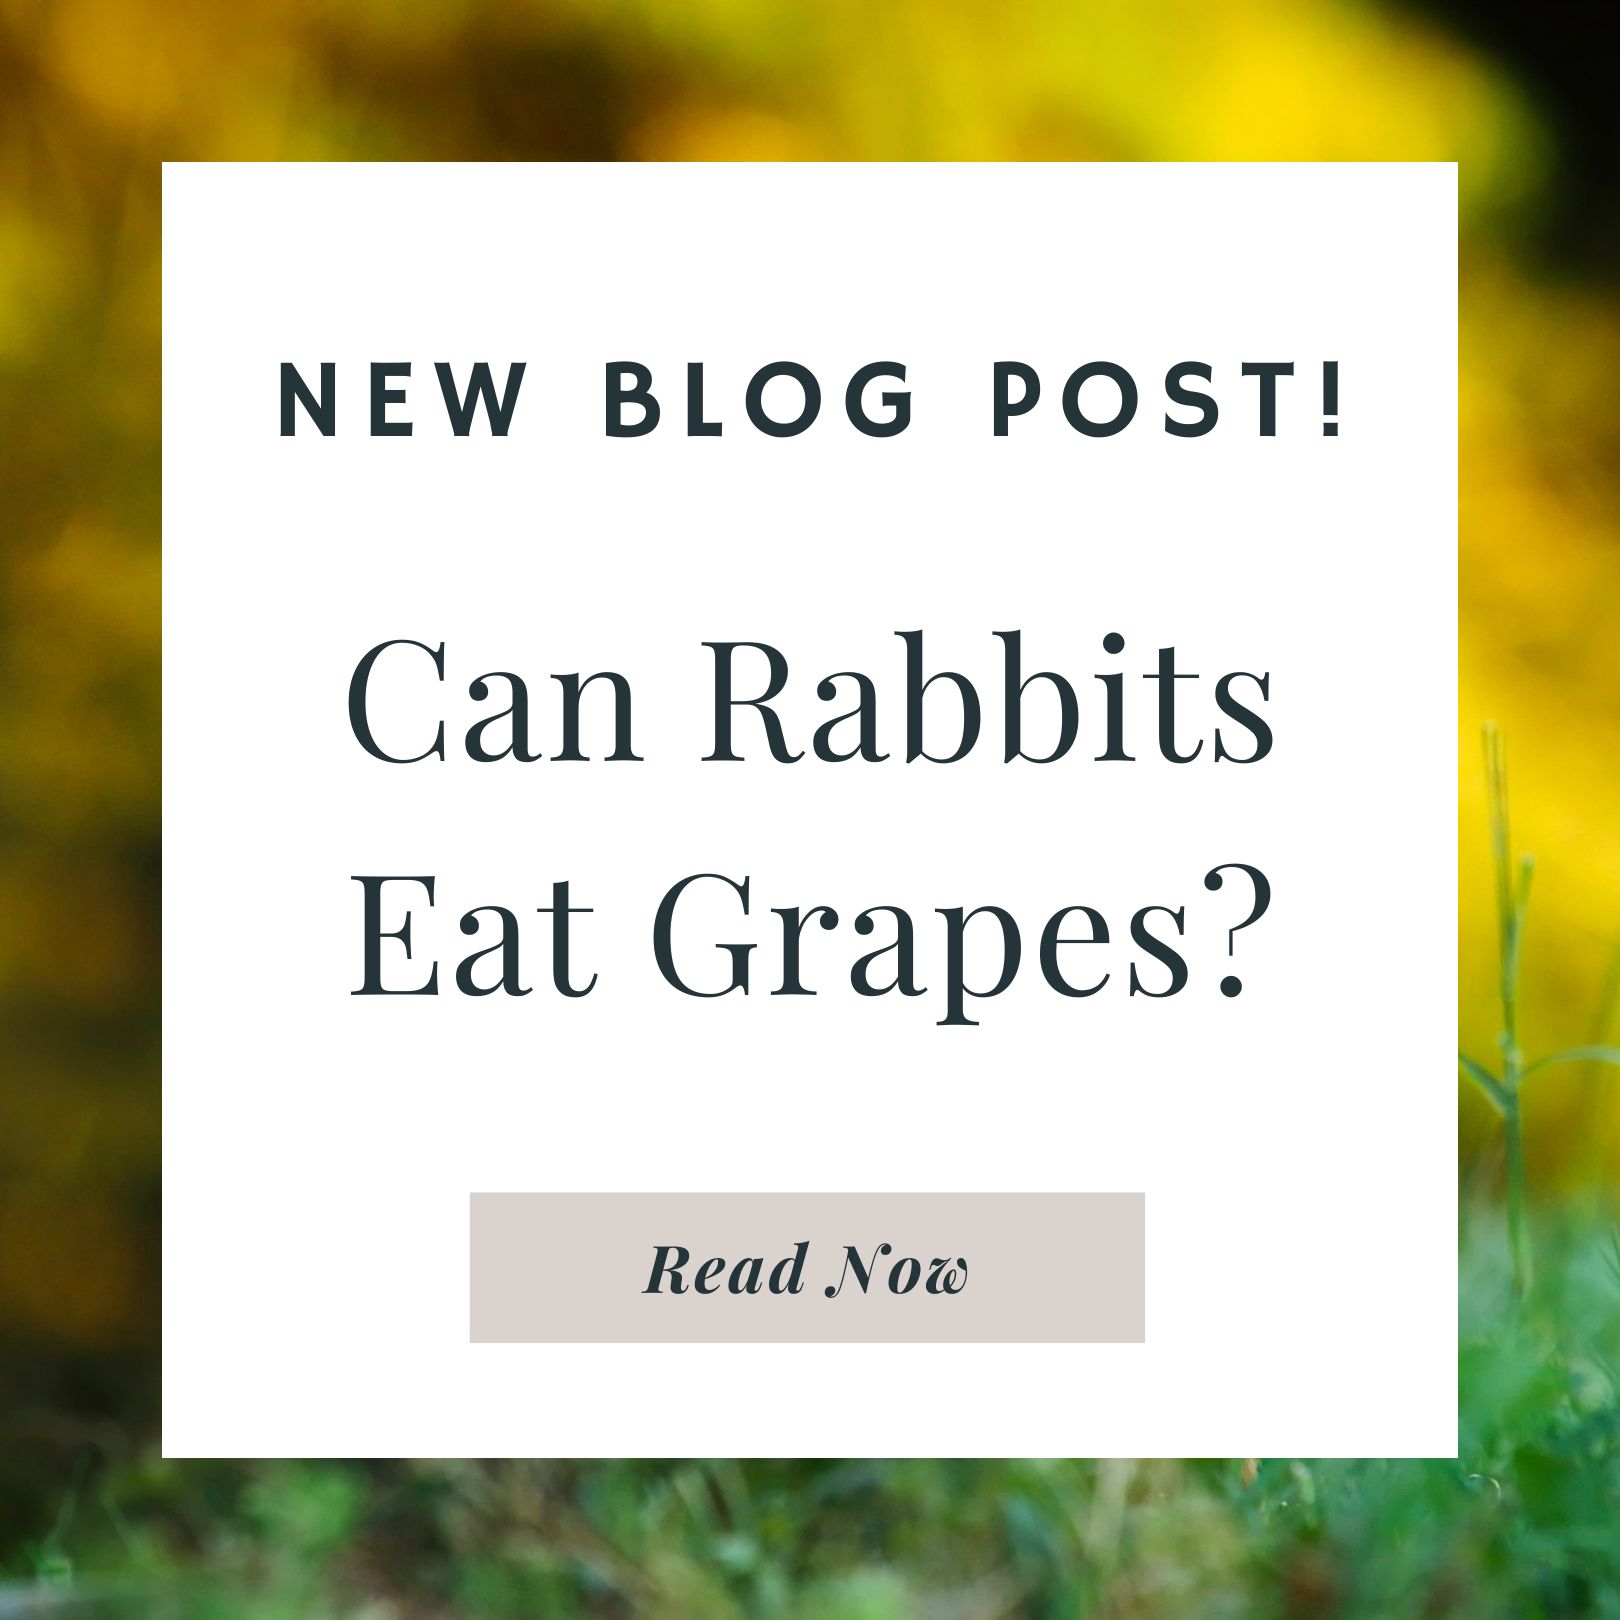 Can Rabbits Eat Romaine Grapes?